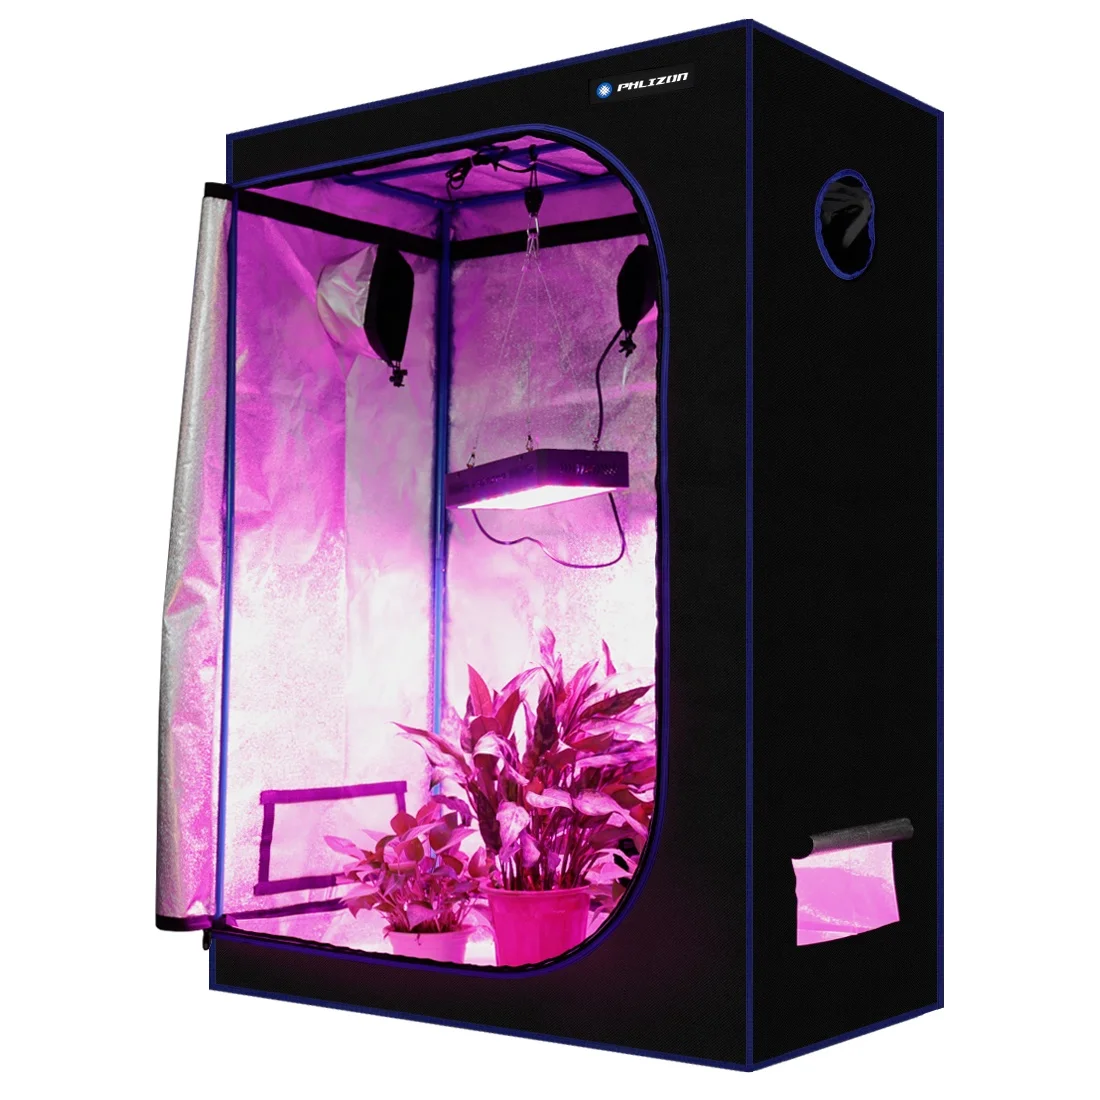 

240*120*200cm Phlizon 600D Waterproof Grow Tent Indoor Reflective Fabric Grow Tent Material With Grow Light Kit for Plants